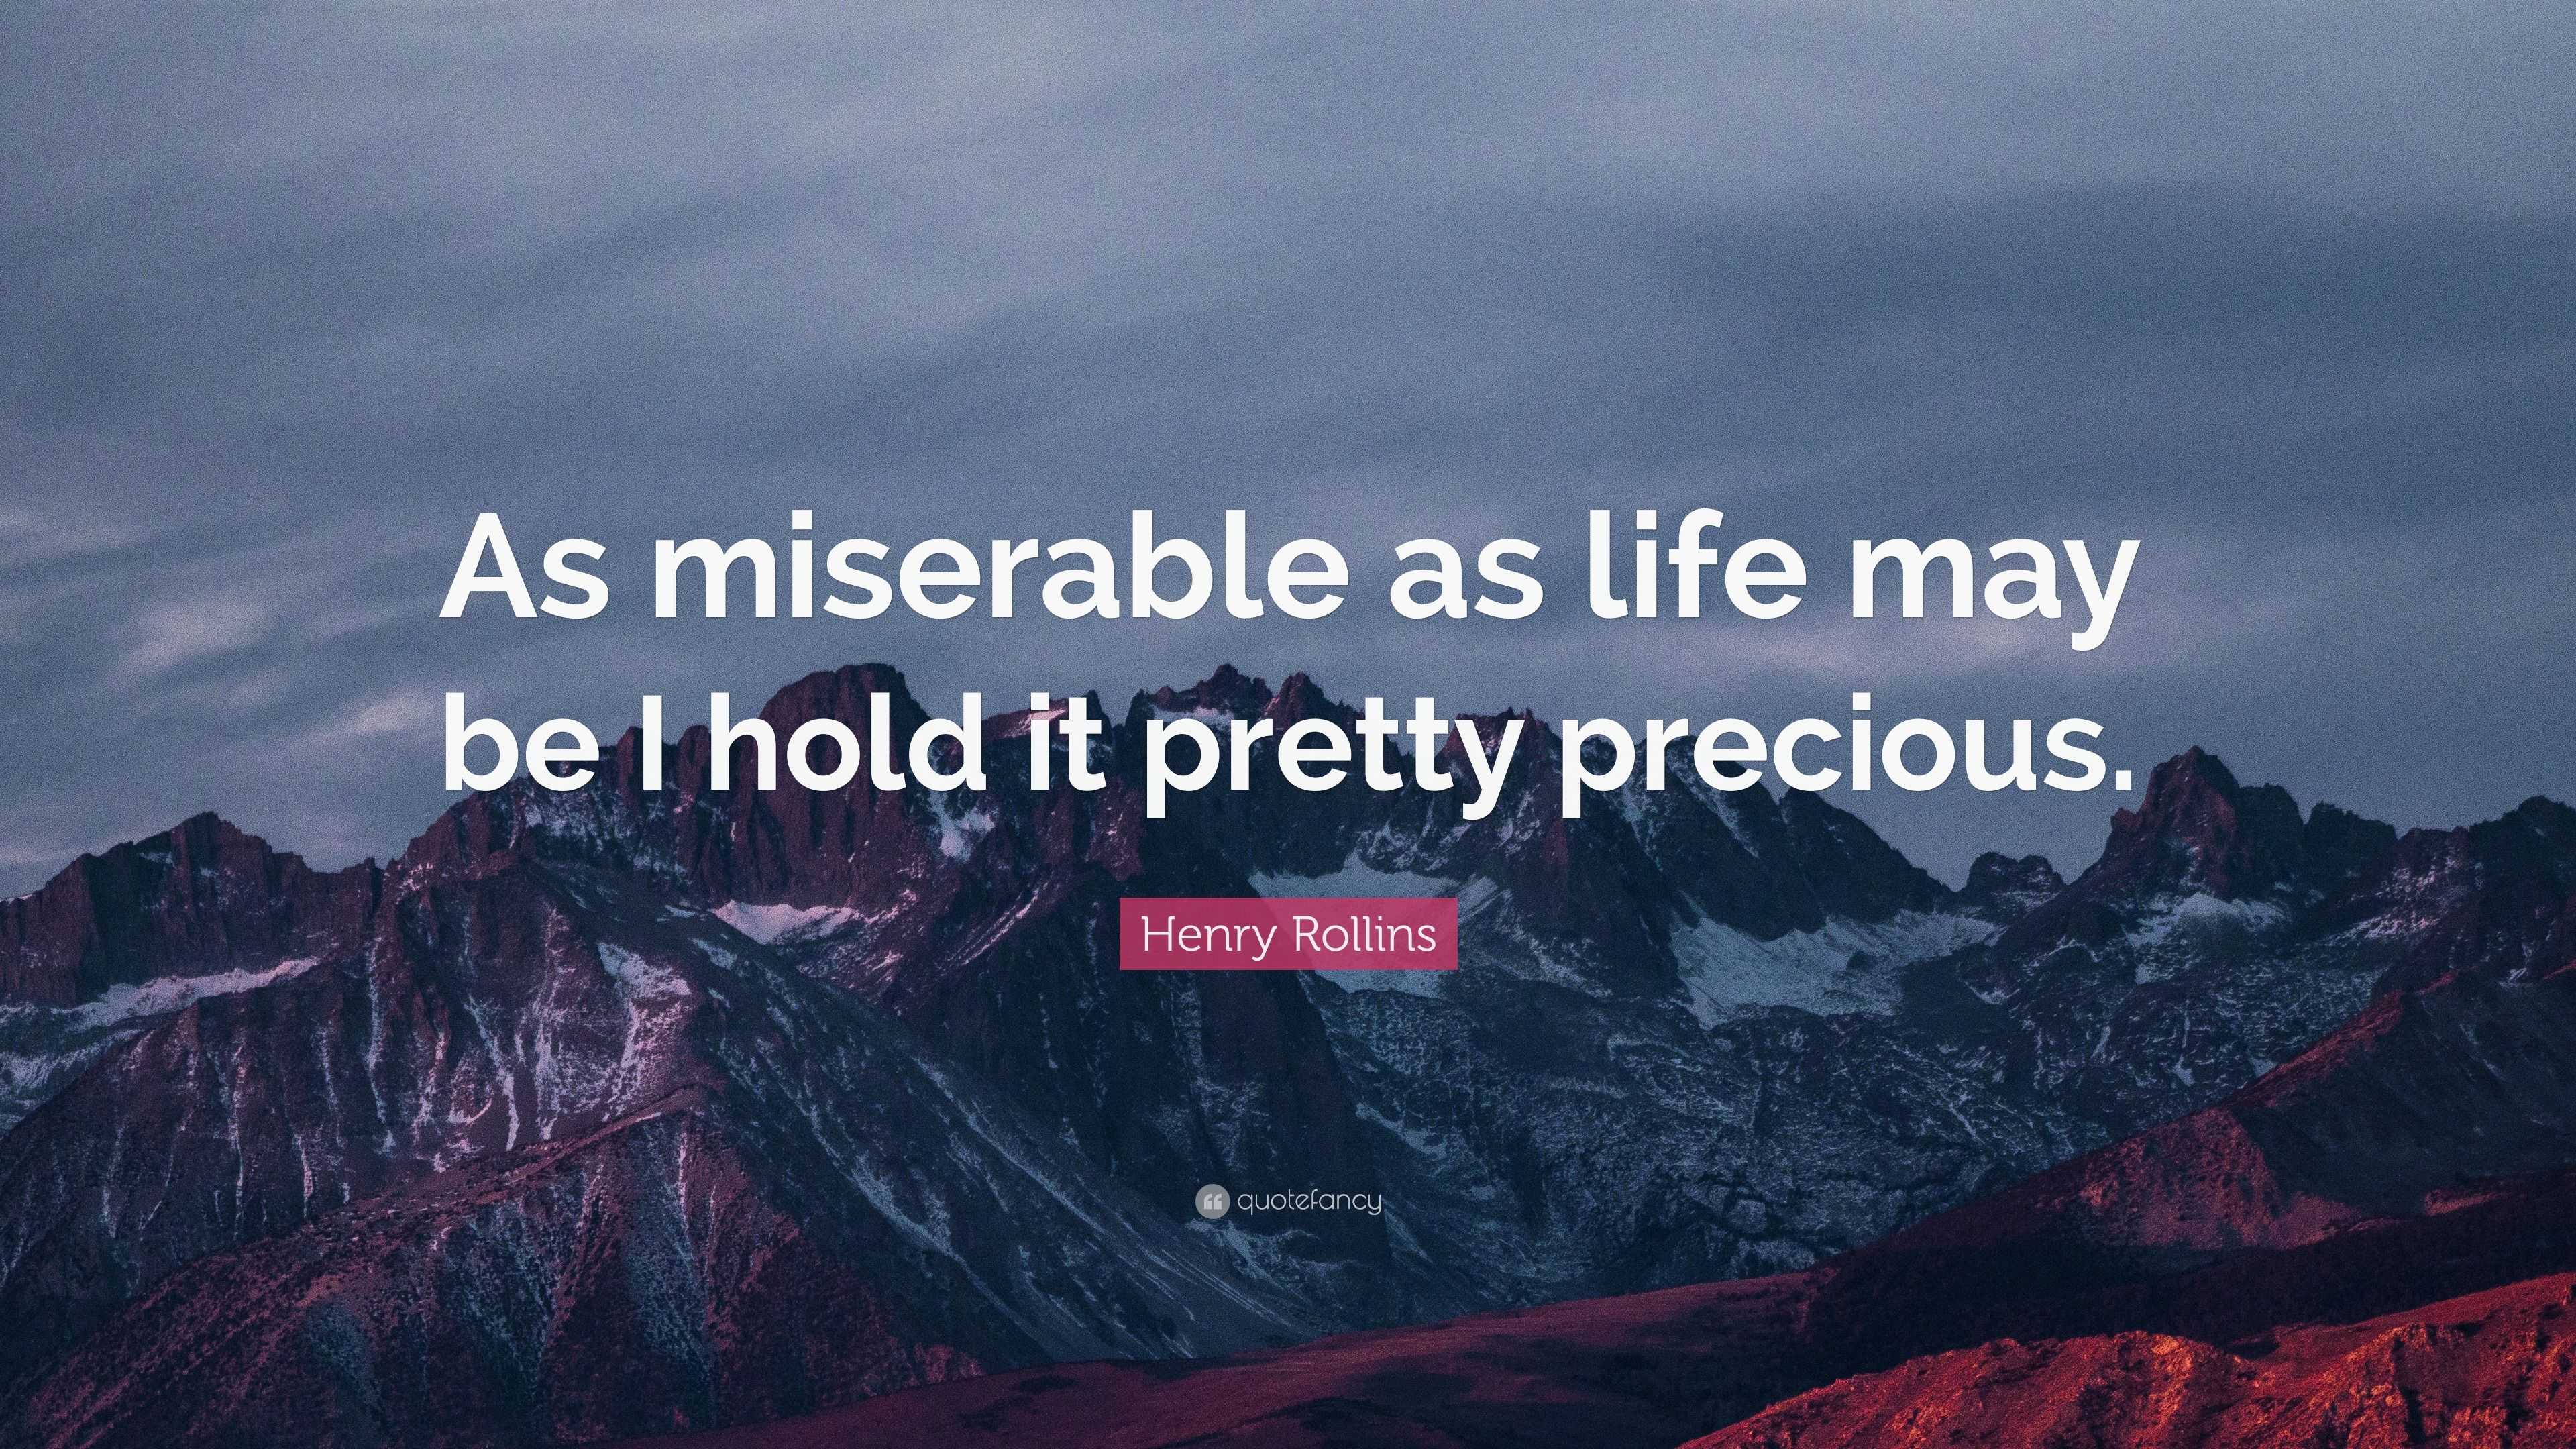 Henry Rollins Quote: “As miserable as life may be I hold it pretty ...